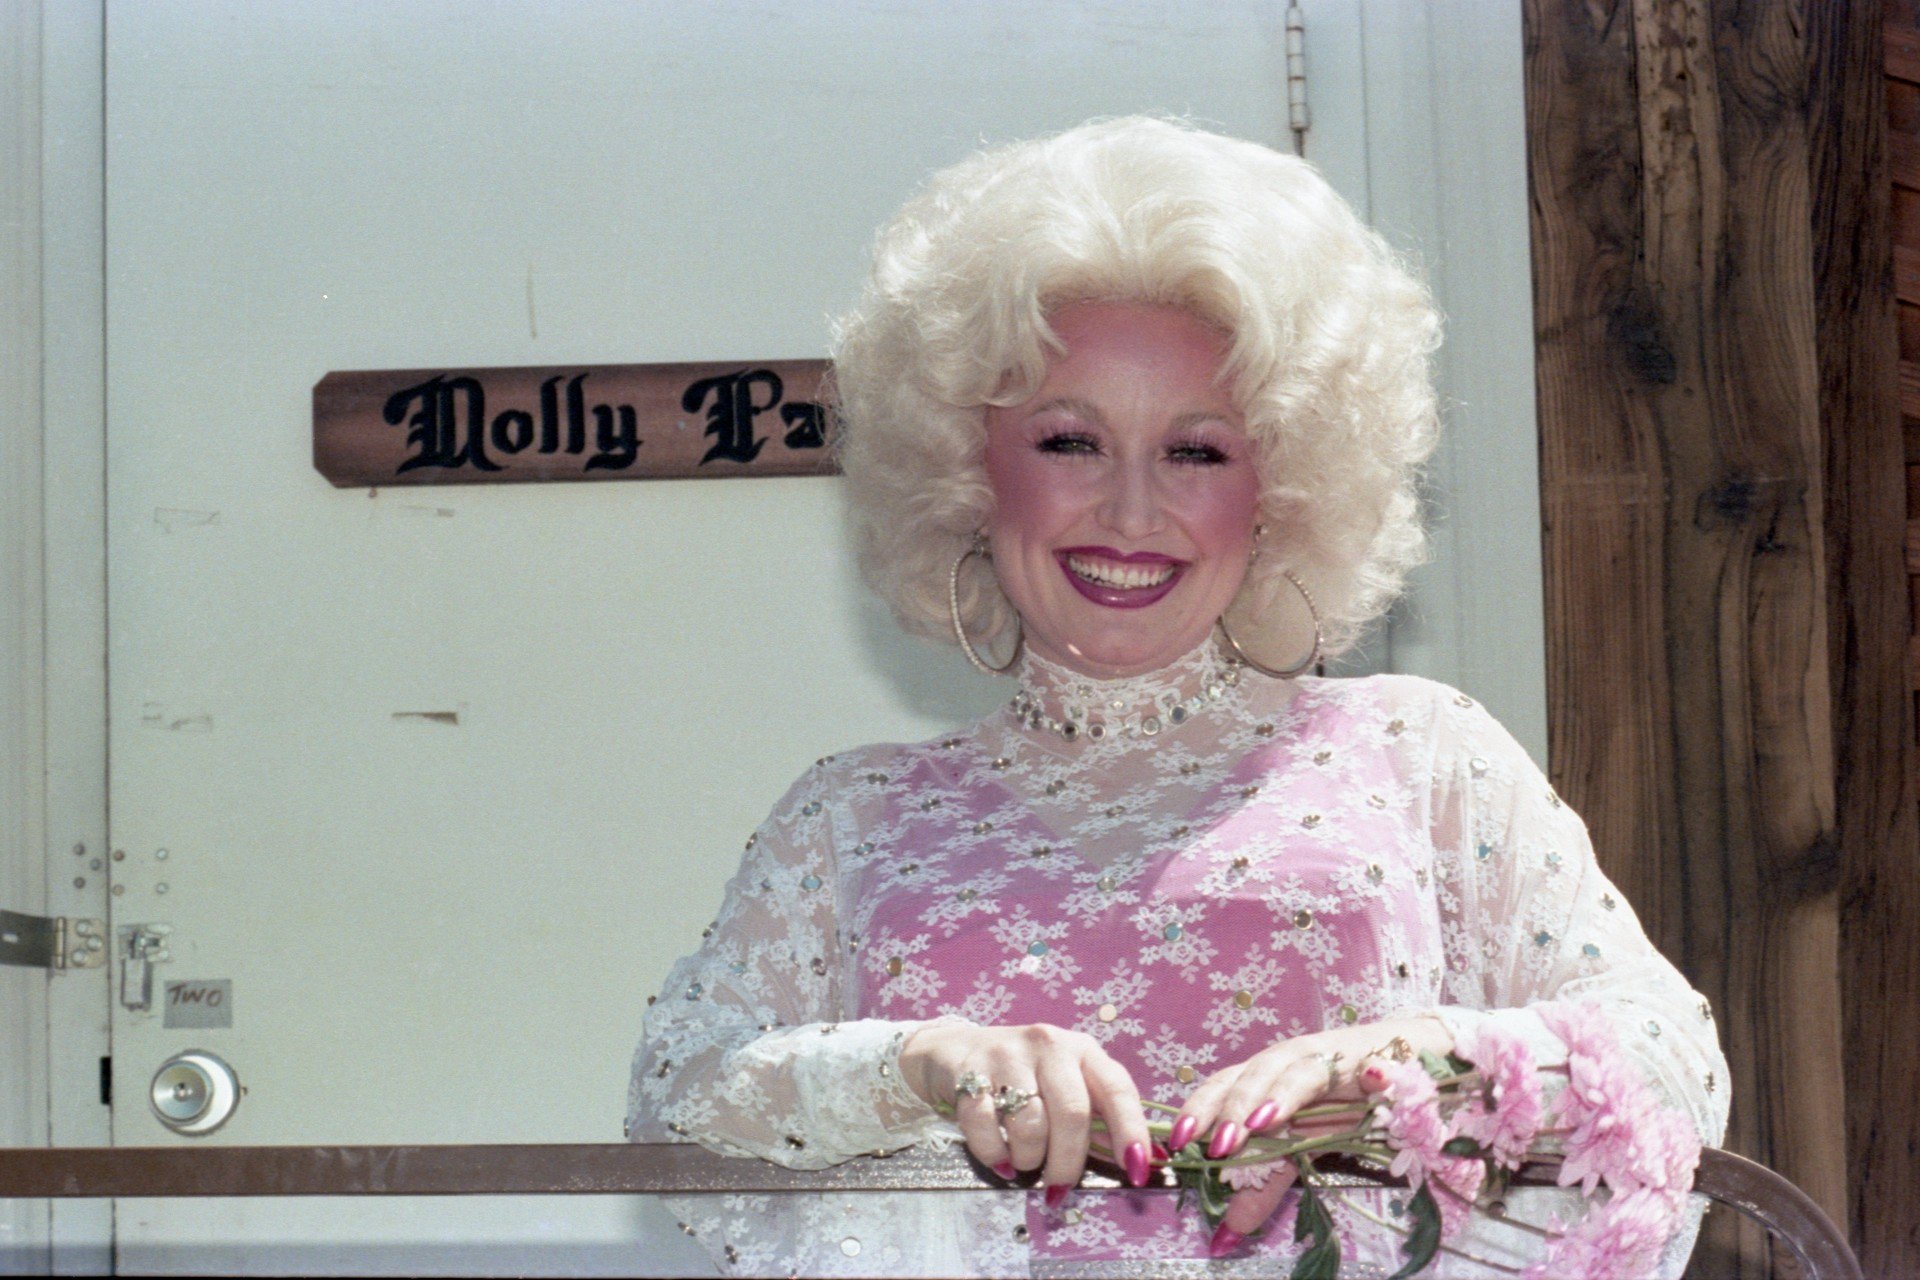 Dolly Parton smiles while wearing a pink and white dress and standing in front of her trailer.